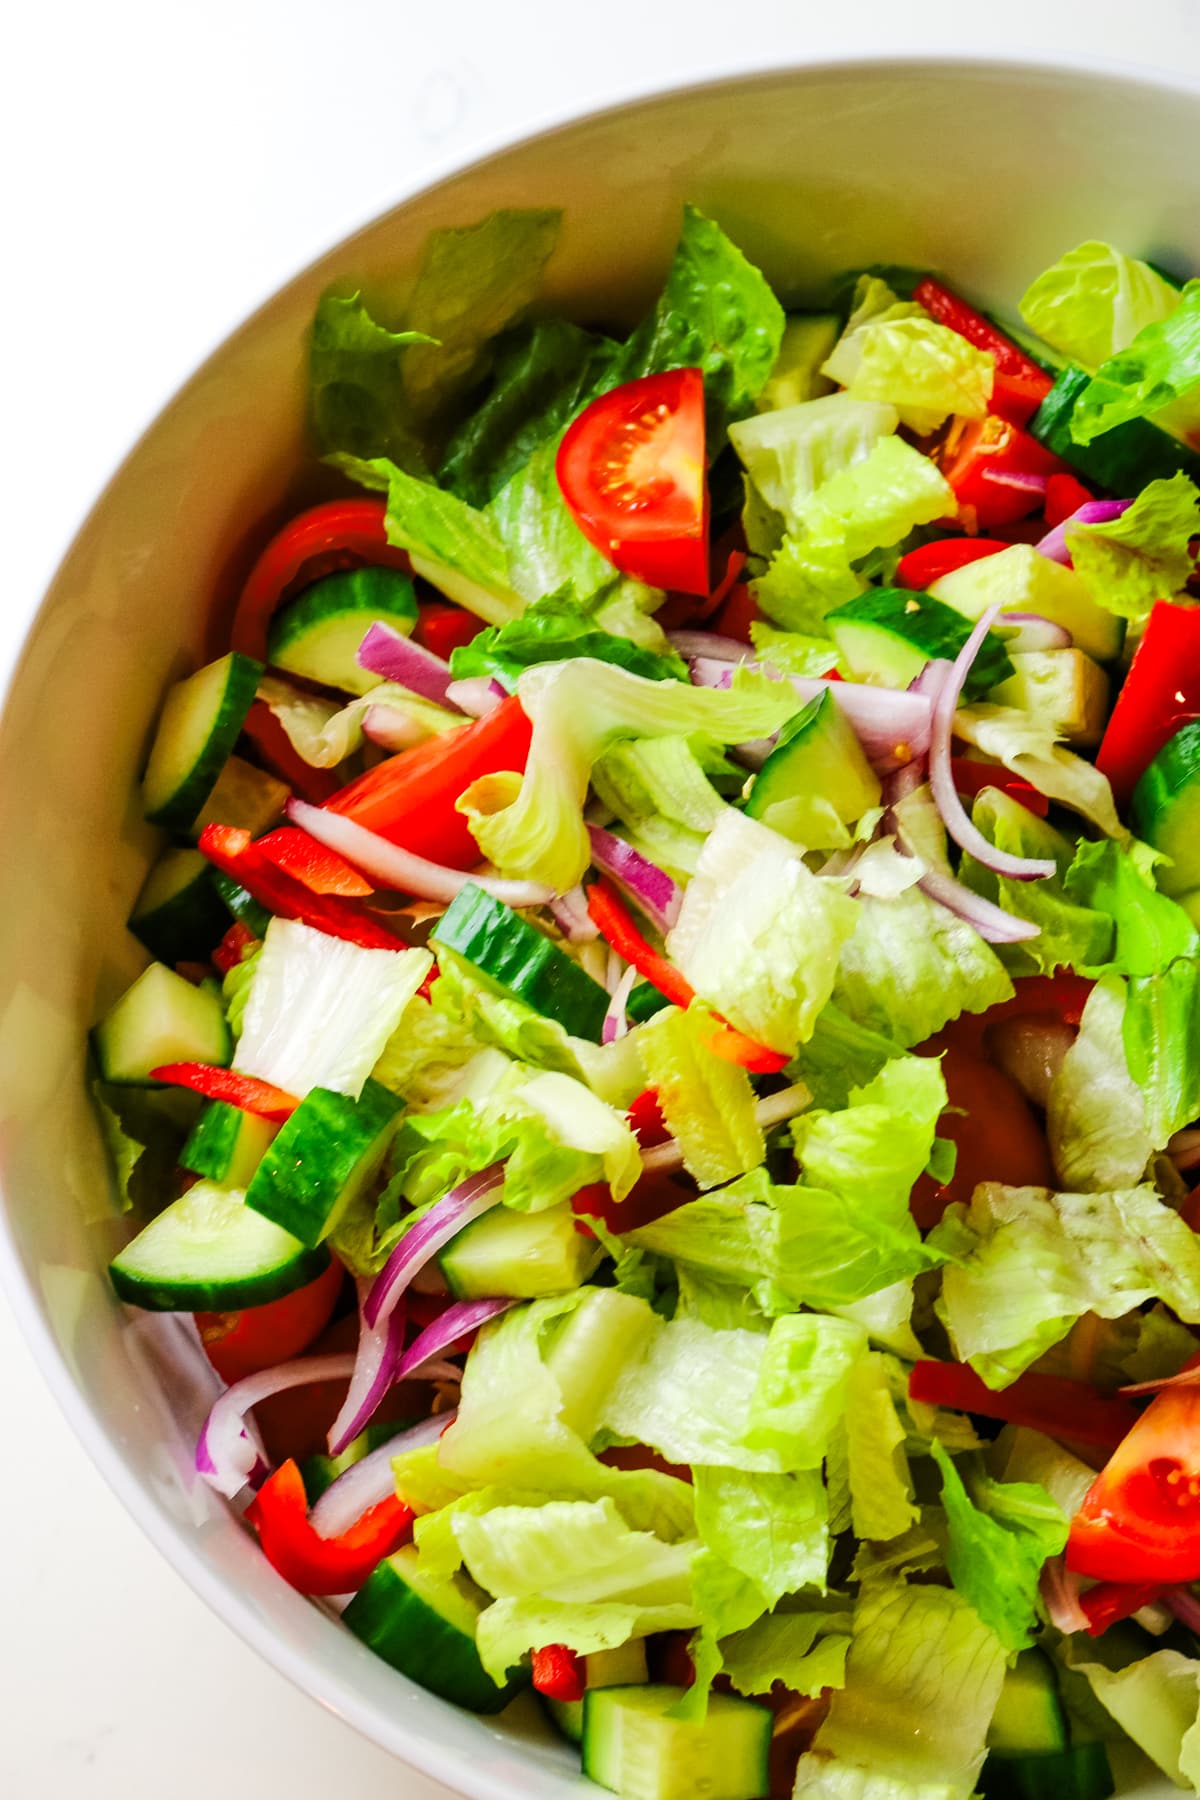 chopped romaine lettuce, red onions, red bell peppers, and tomatoes in a bowl.